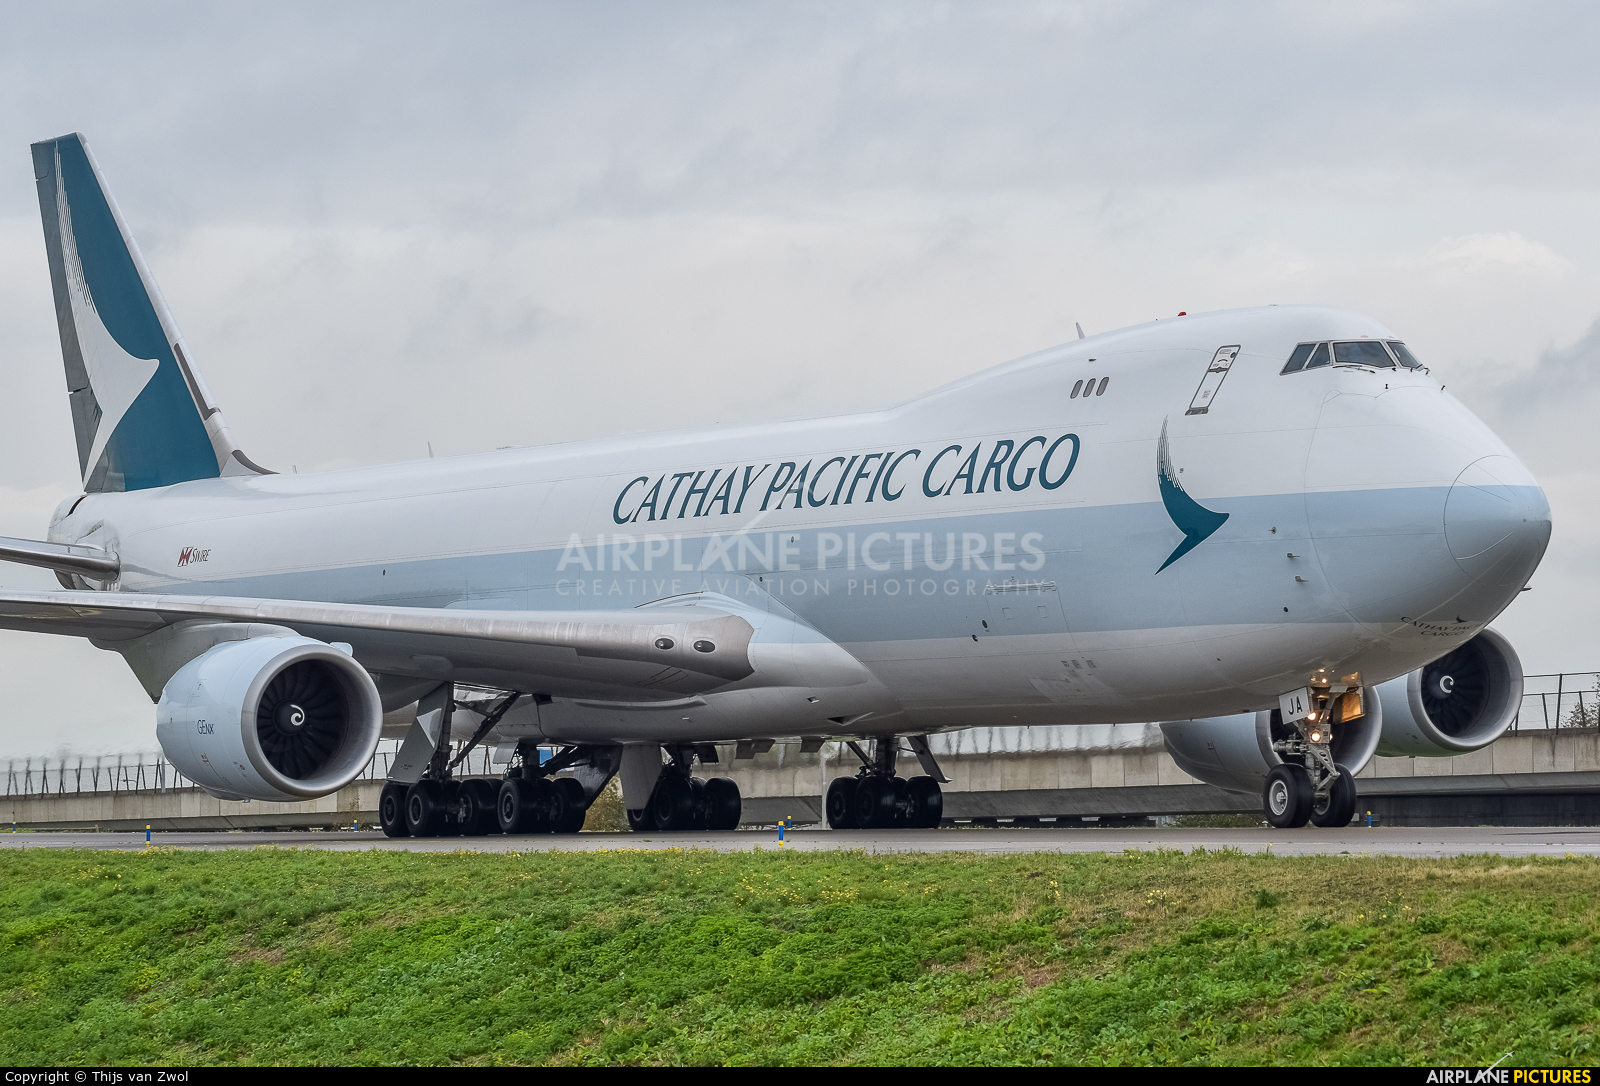 B-LJA - Cathay Pacific Cargo Boeing 747-8F at Amsterdam - Schiphol | Photo  ID 1247378 | Airplane-Pictures.net